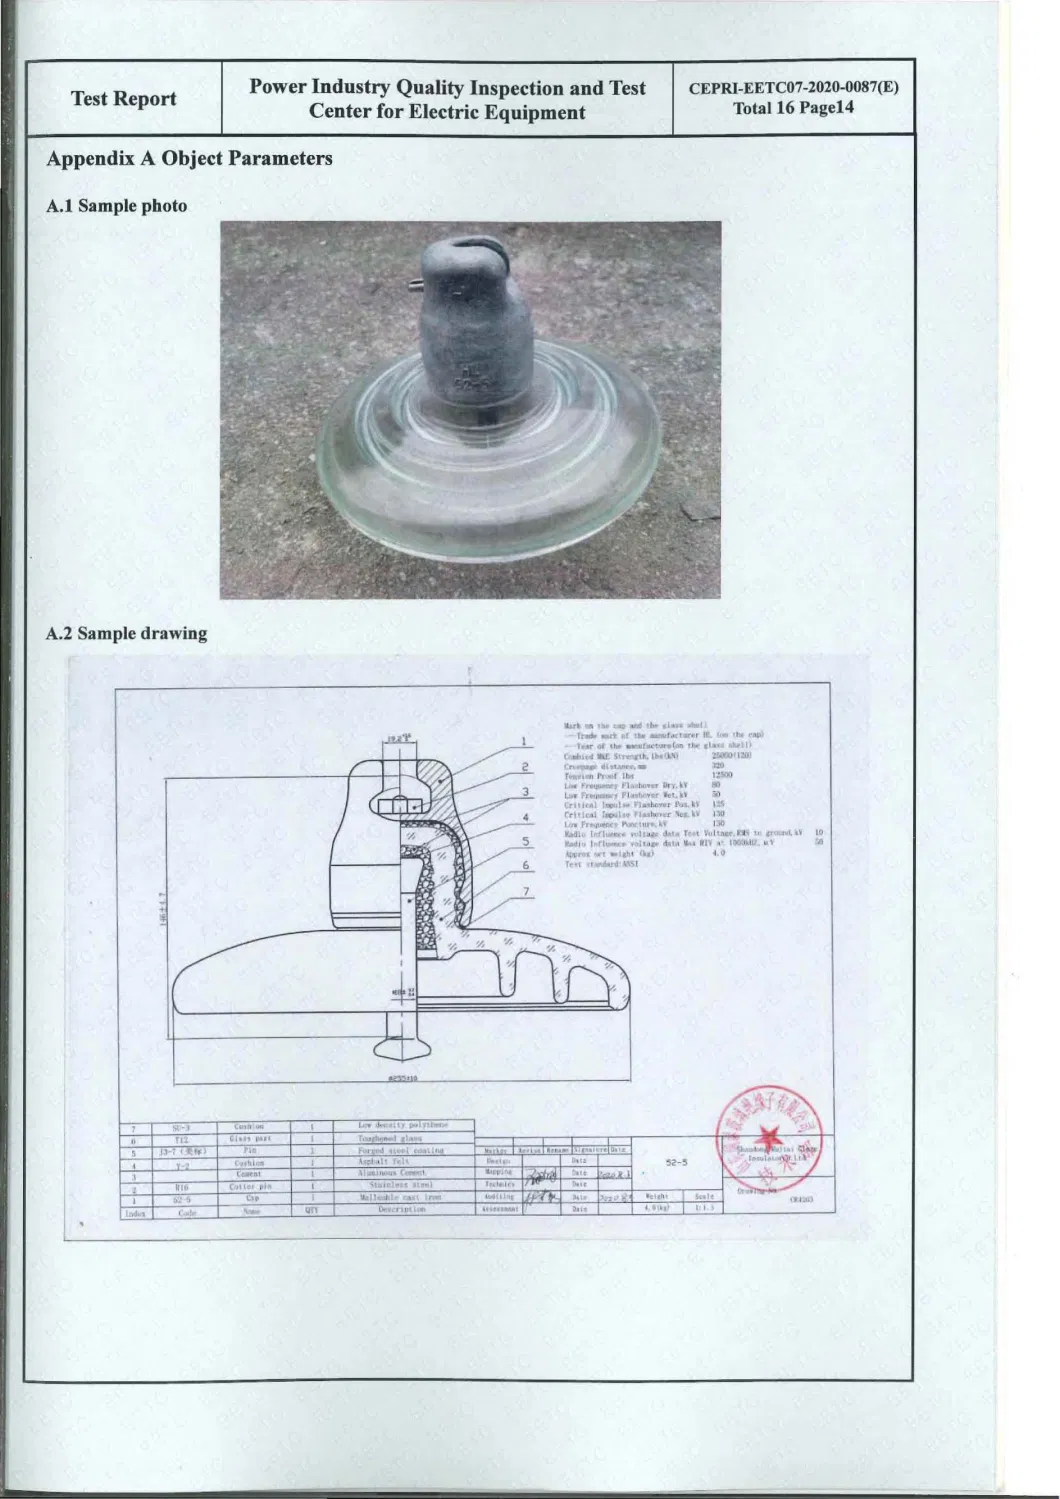 Glass Insulator for Switch and Connector with Zinc Sleeve IEC Standard Insulators